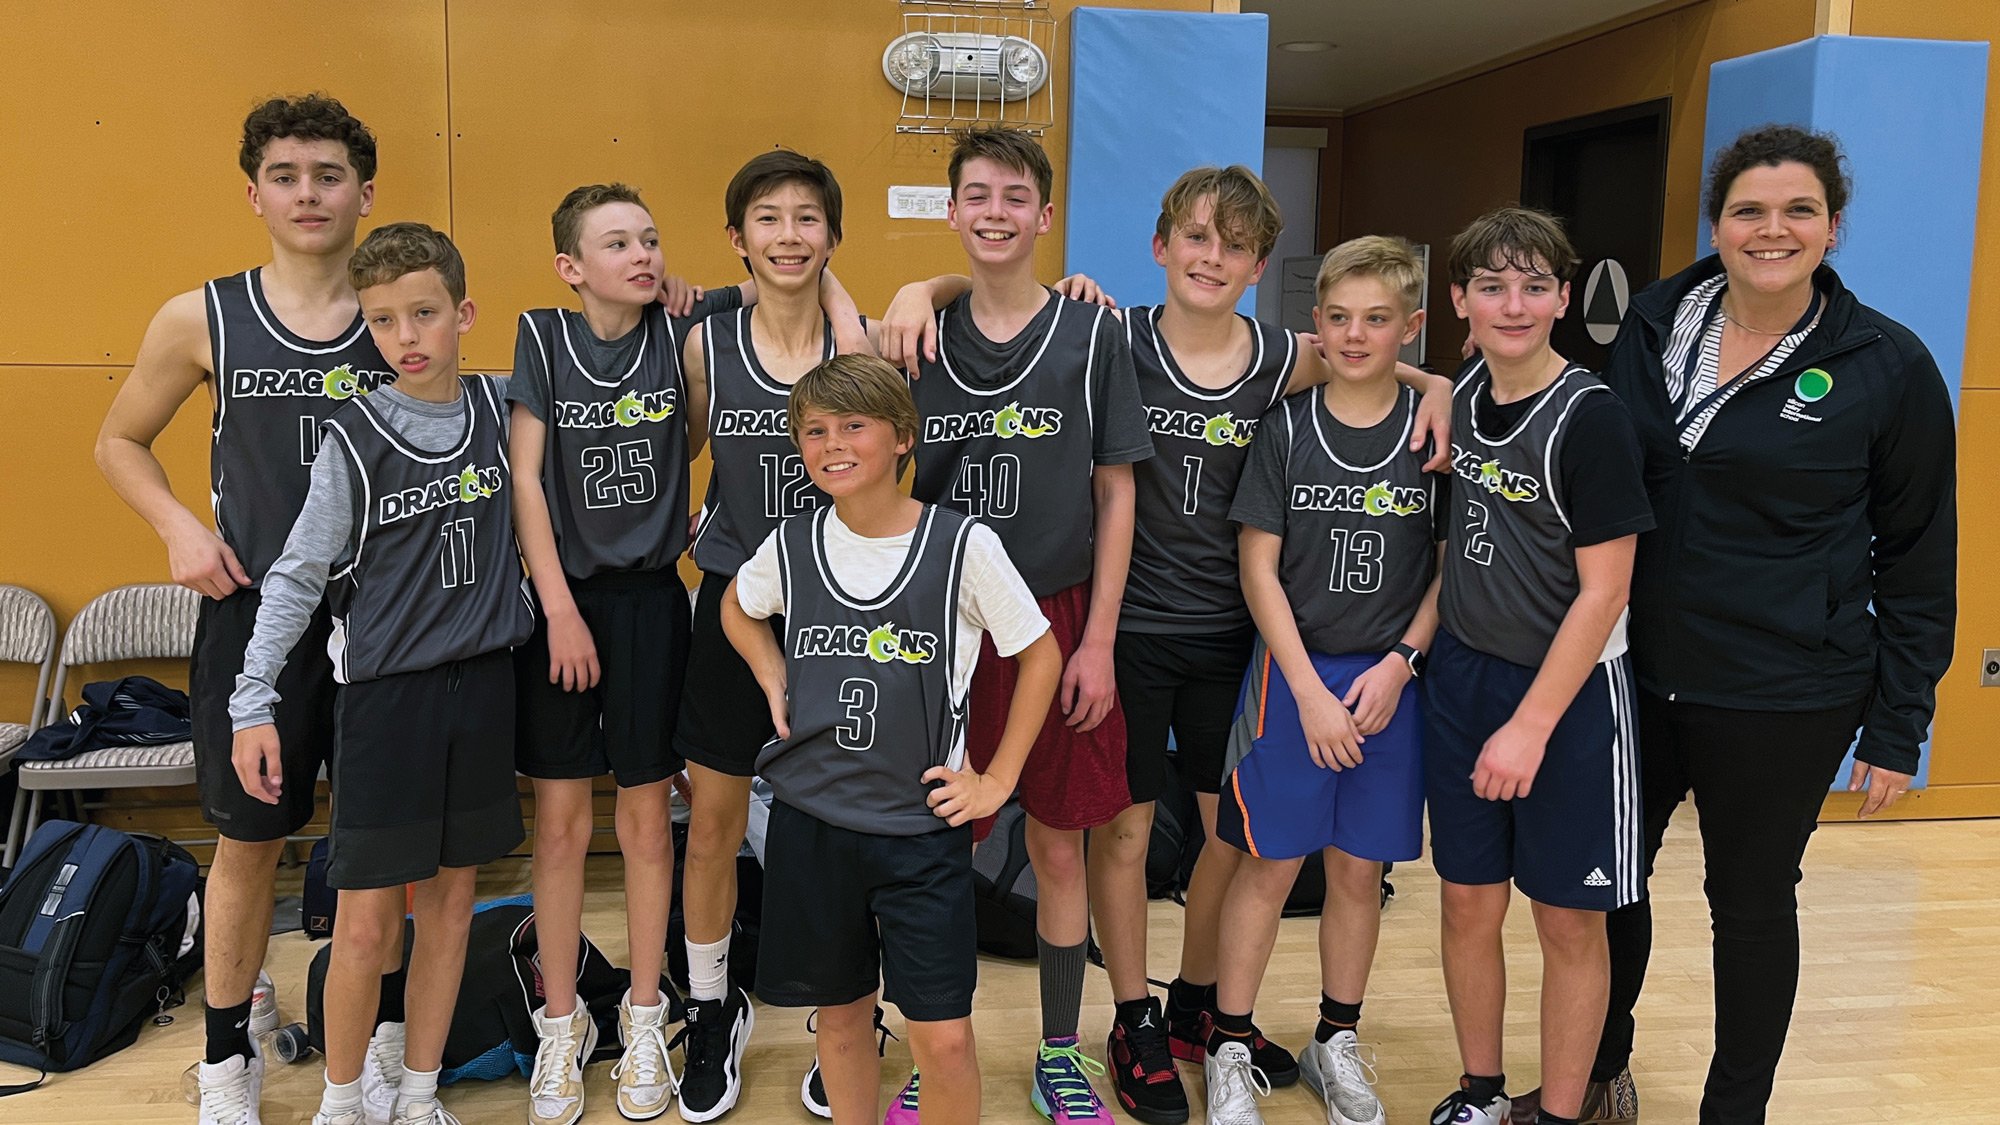 A team photo of the 7th and 8th Grade boys basketball team after a game.